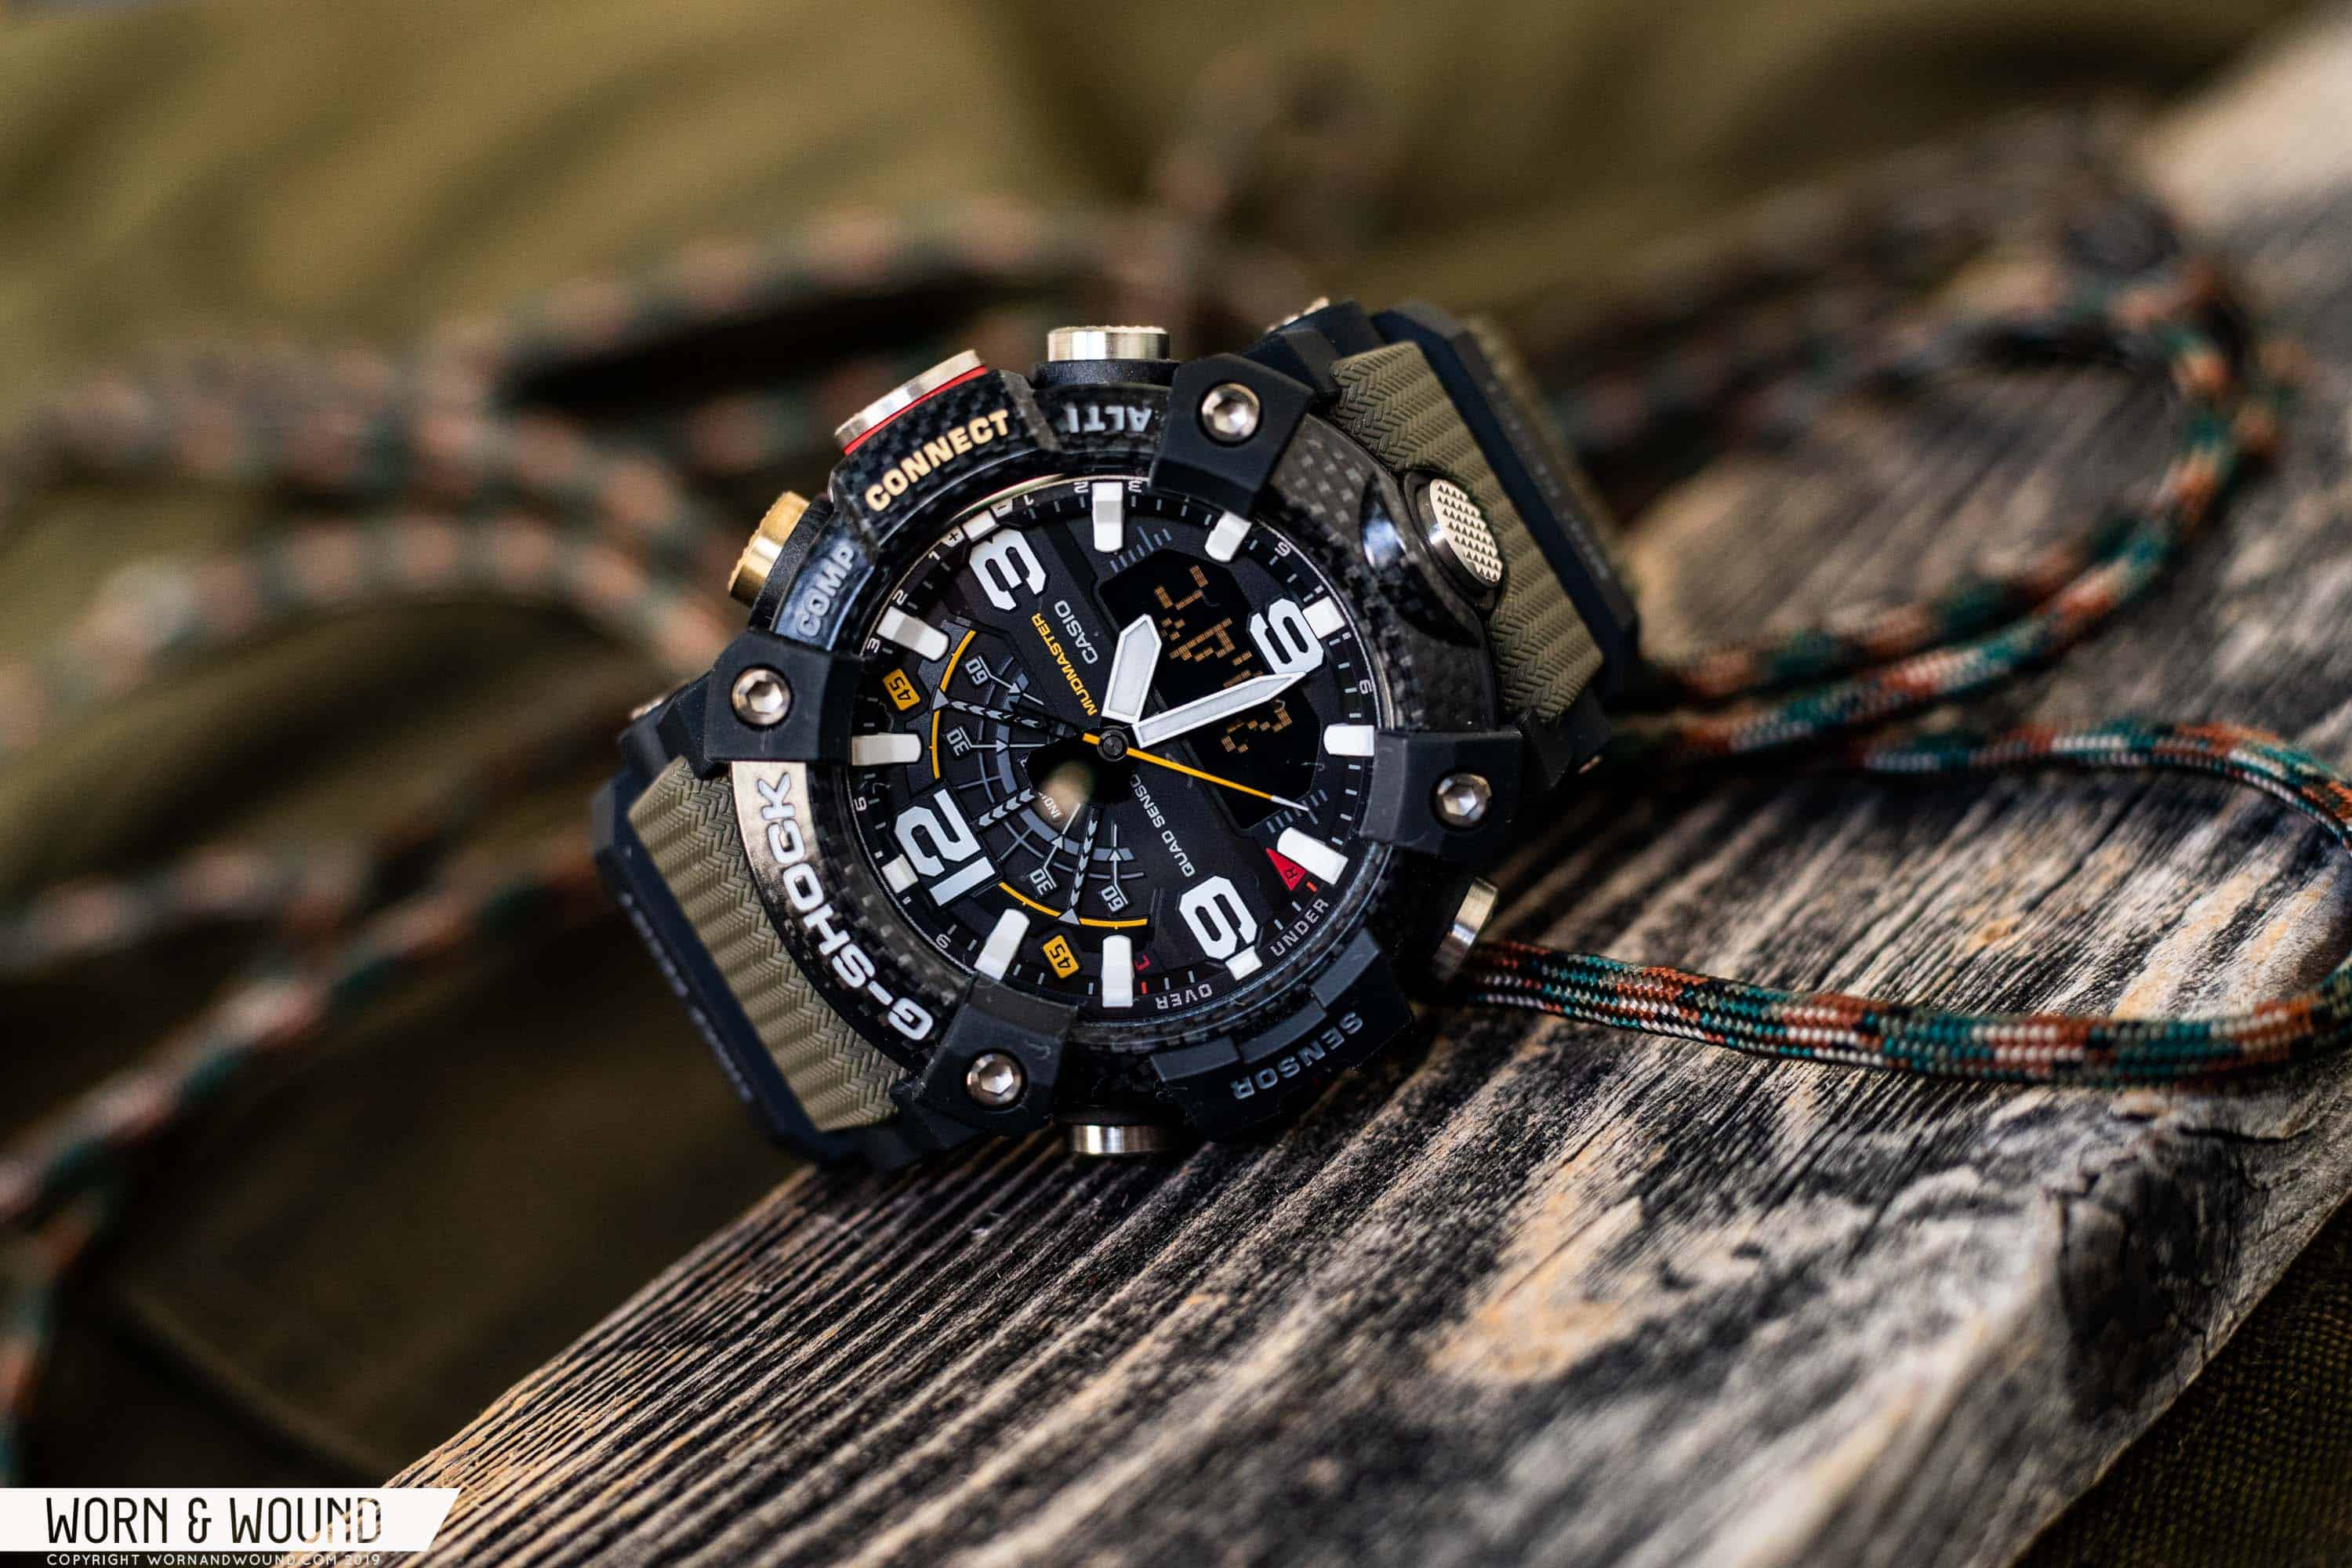 Casio to introduce rugged G-Shock smartwatch, launch expected in 2016